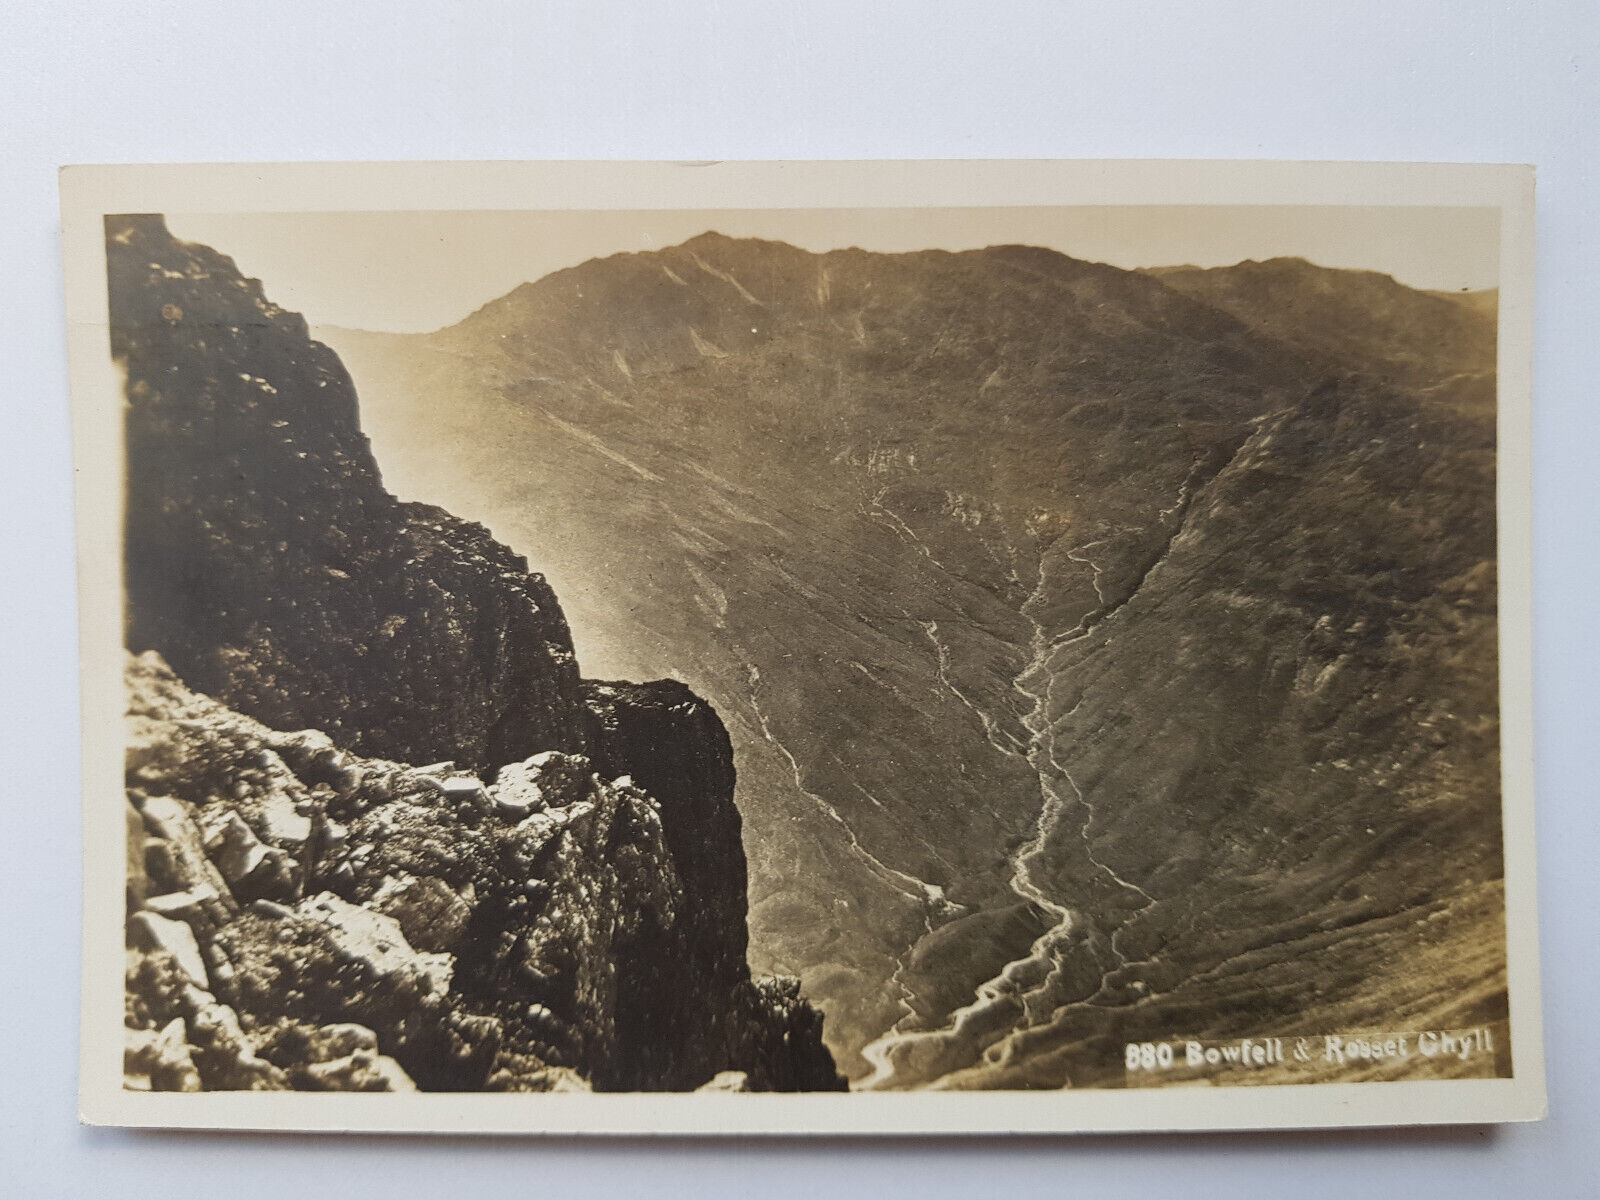 House Clearance - Vintage Service - Bowfell & Rossett Ghyll Pike Lake District Real Photo RPPC